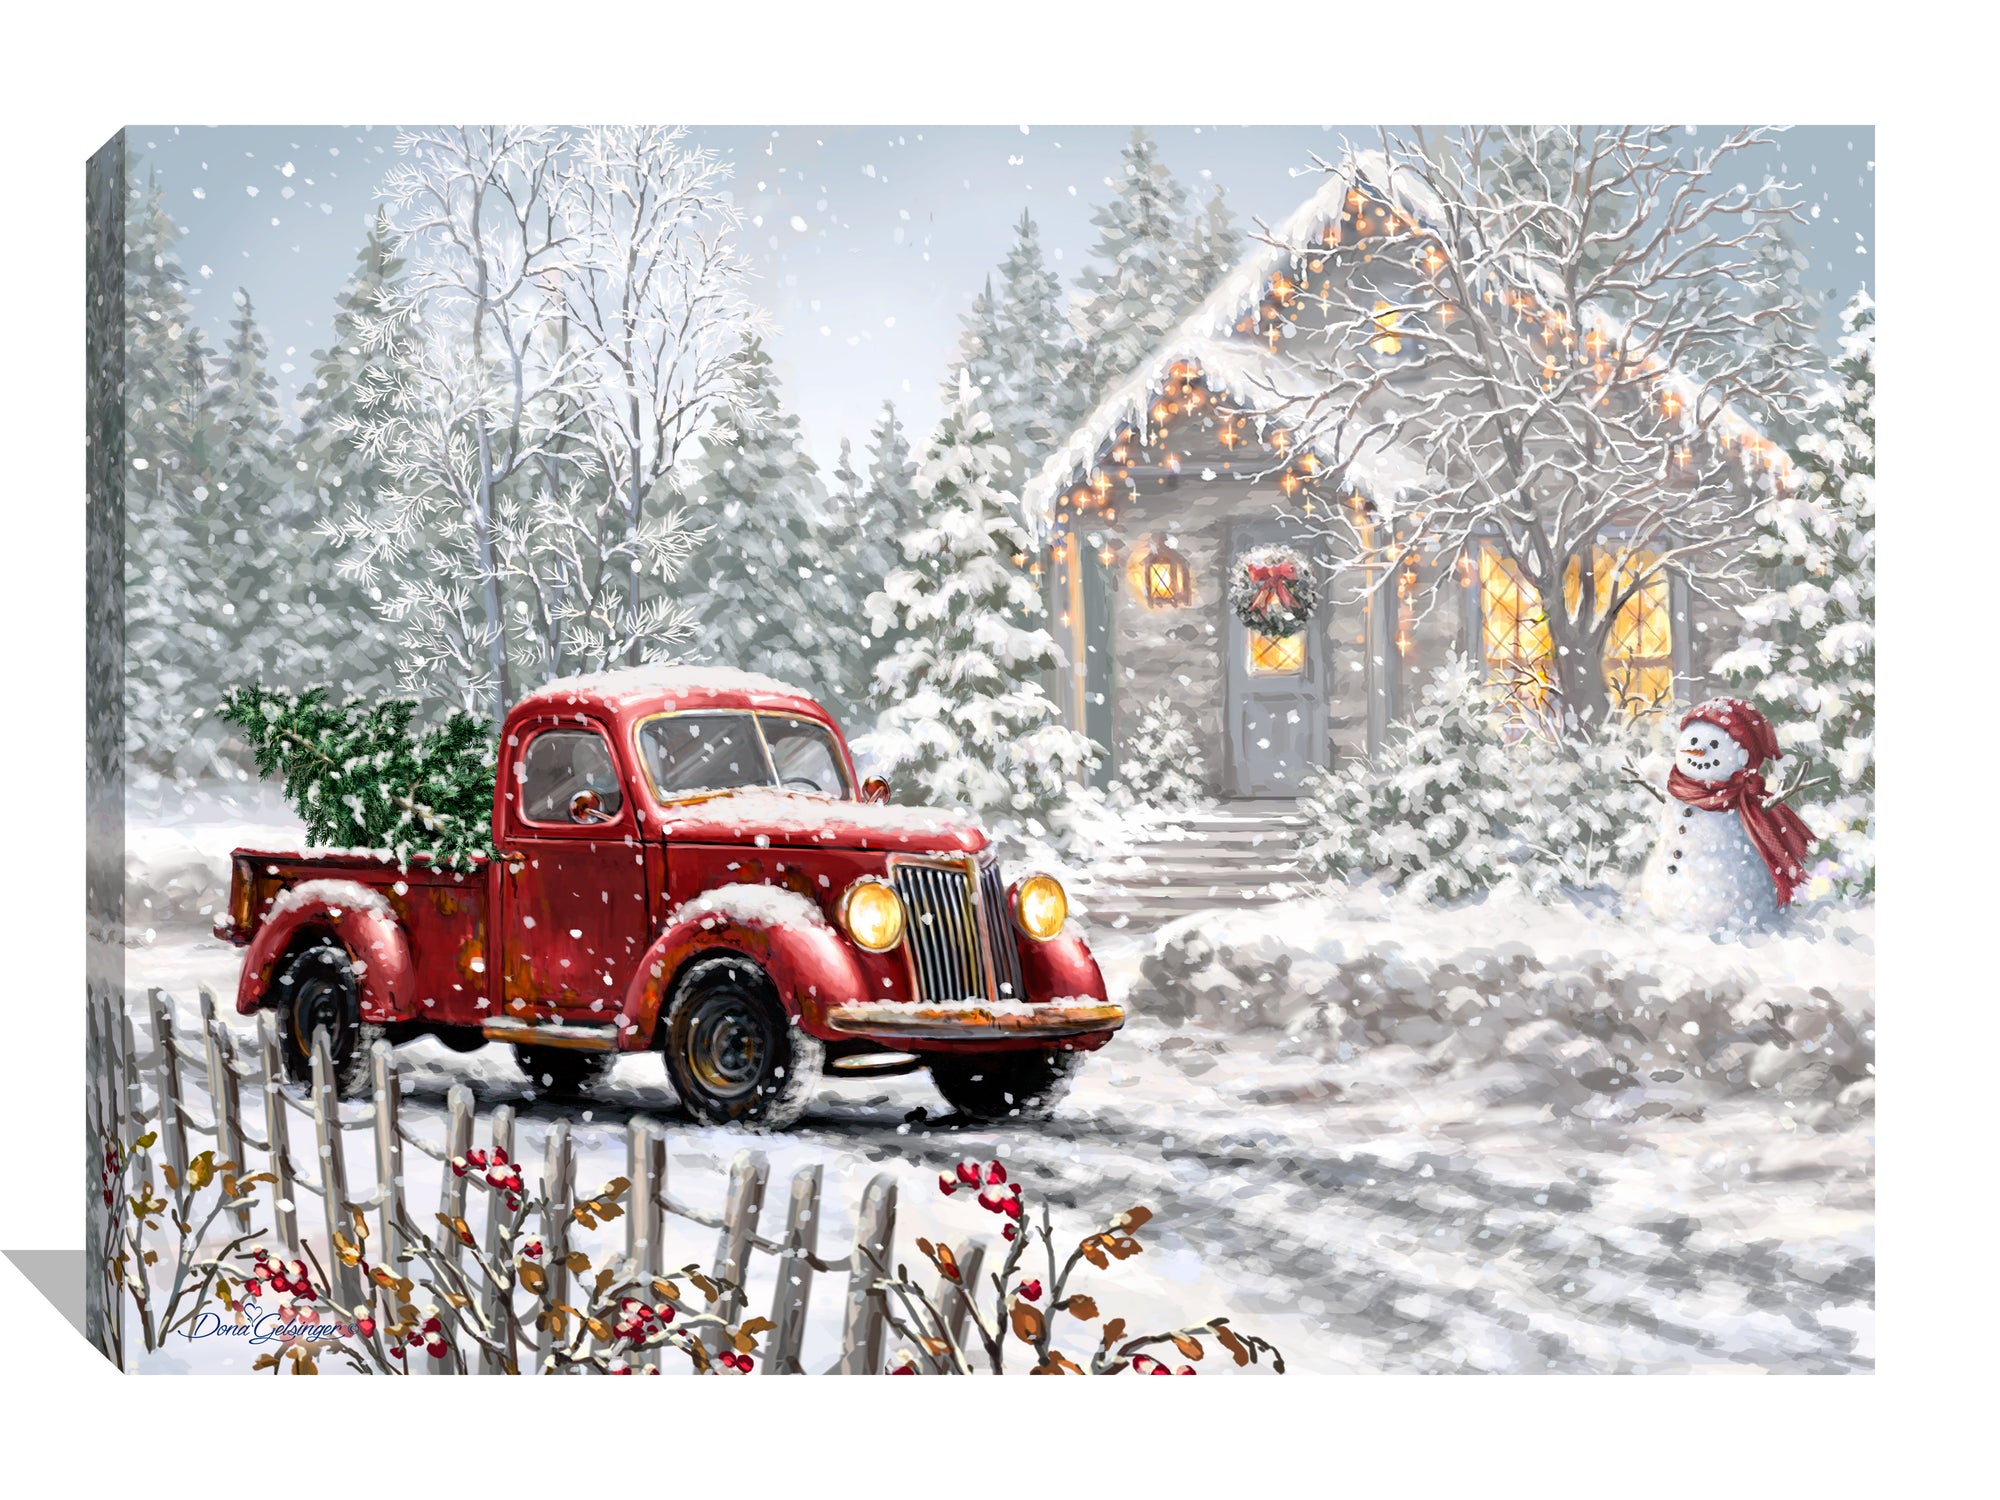 a vintage red truck parked in front of a quaint cottage covered in a blanket of snow. The truck is carrying a freshly cut Christmas tree, ready to be taken inside and decorated with your loved ones.